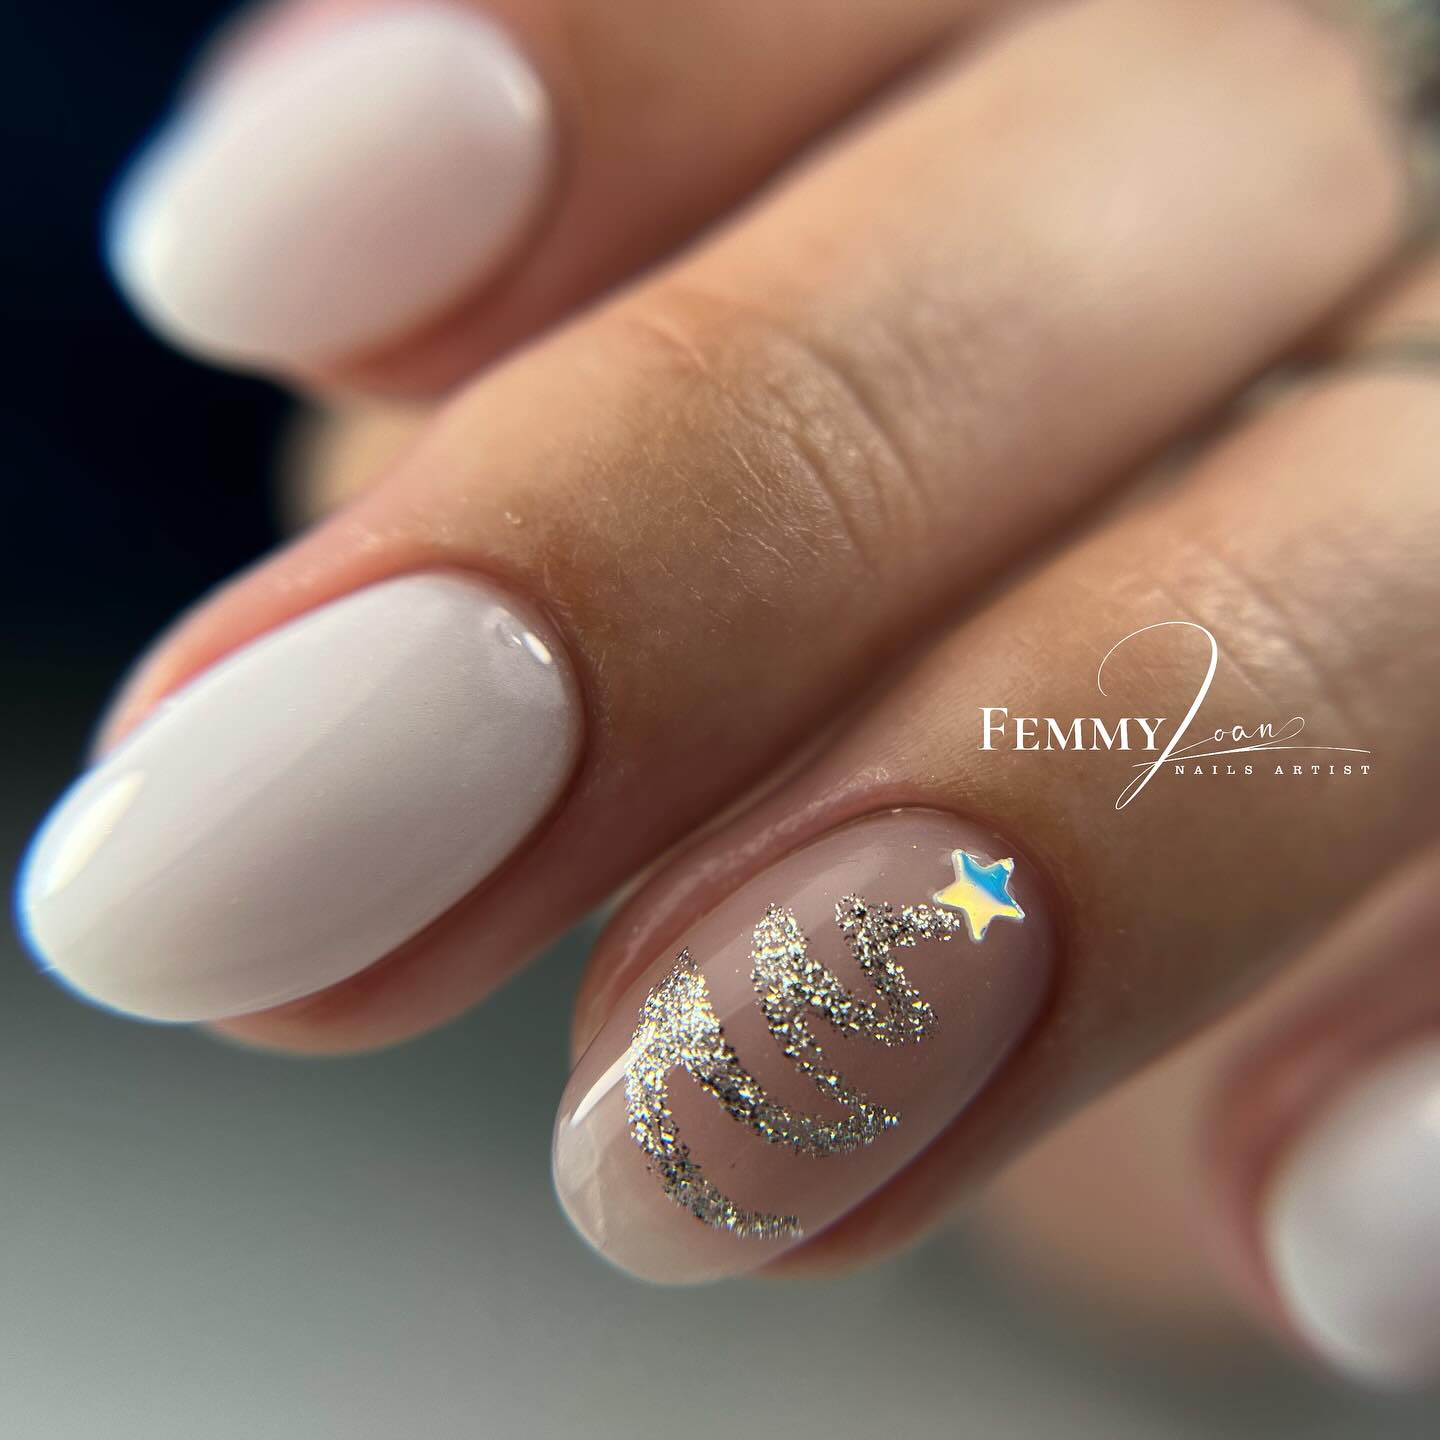 100+ Gorgeous Winter Nail Designs And Ideas images 78